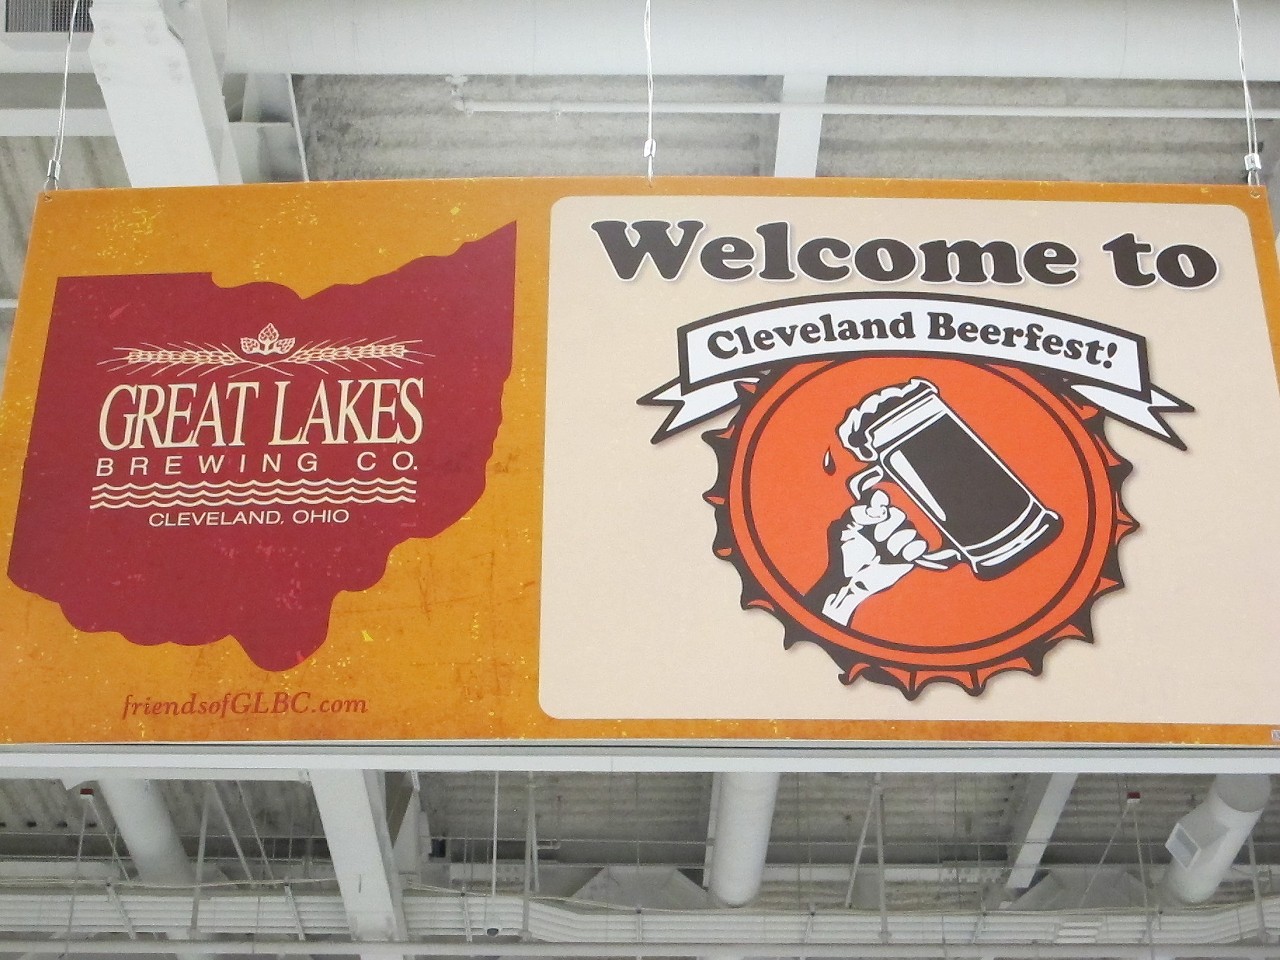 Photos from last night's Cleveland Beerfest at the Convention Center